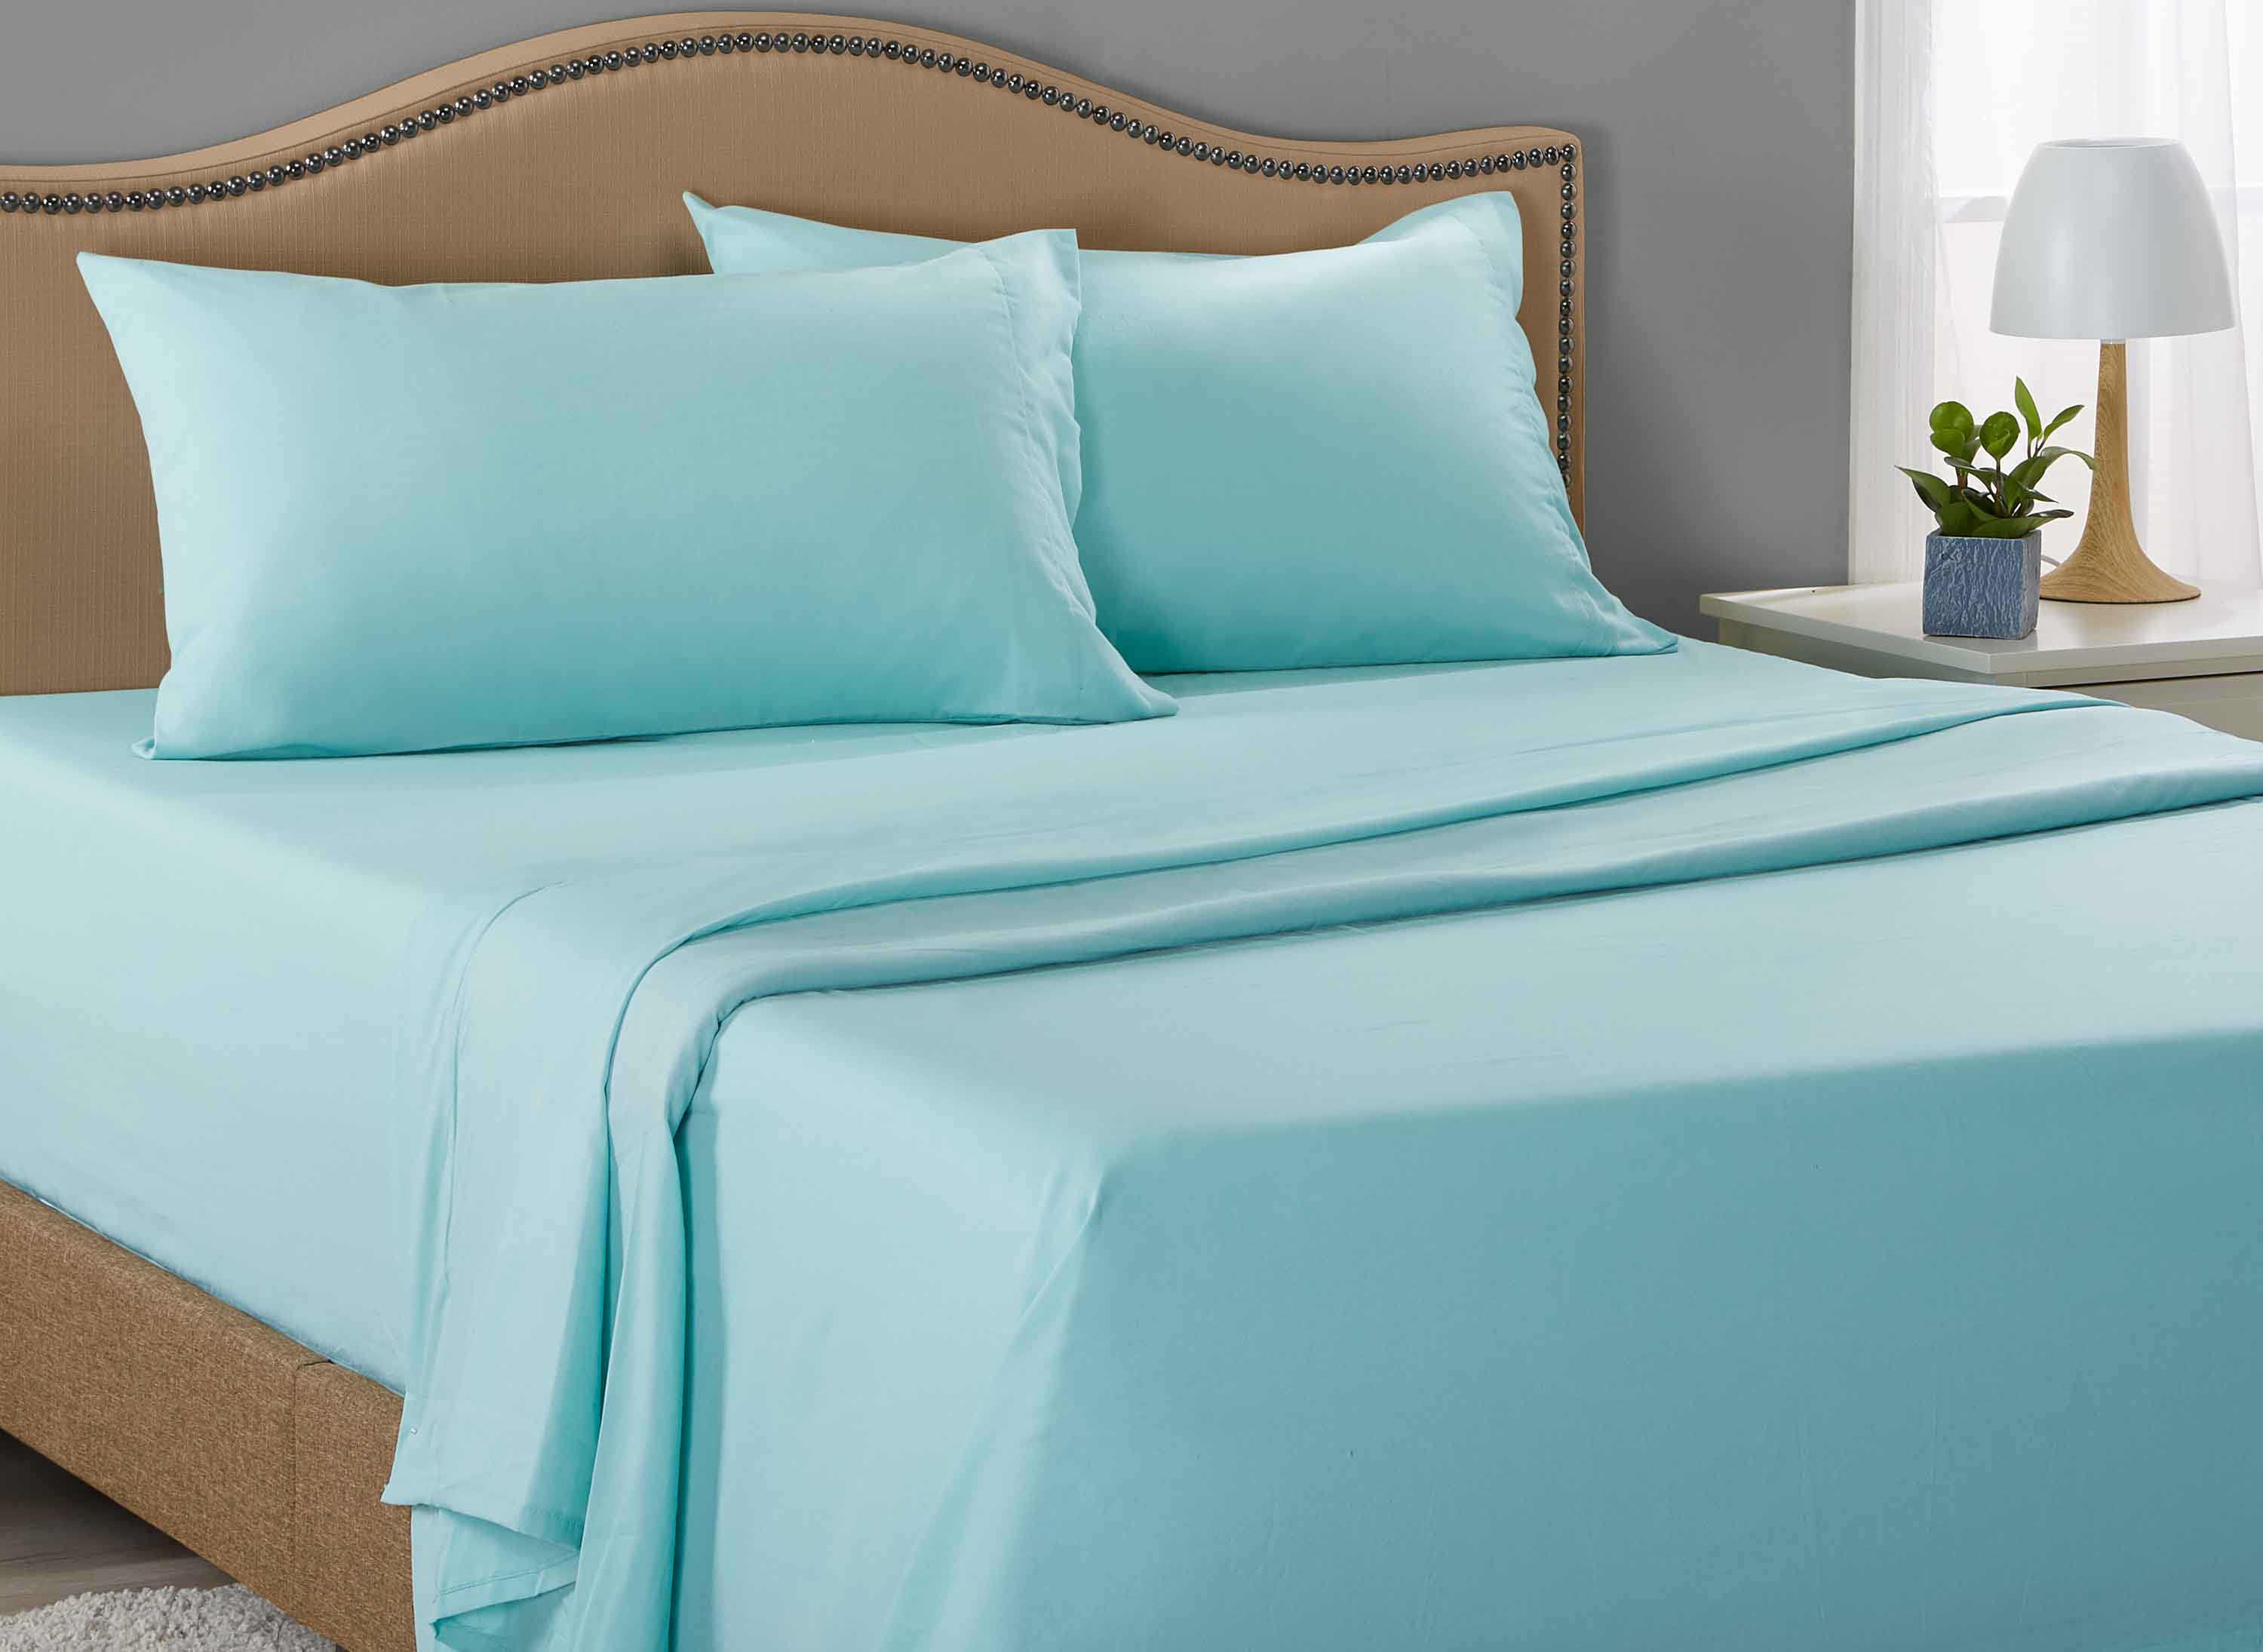 Mainstays 200 Thread Count King - Fitted Sheet, Sheet Collection ...